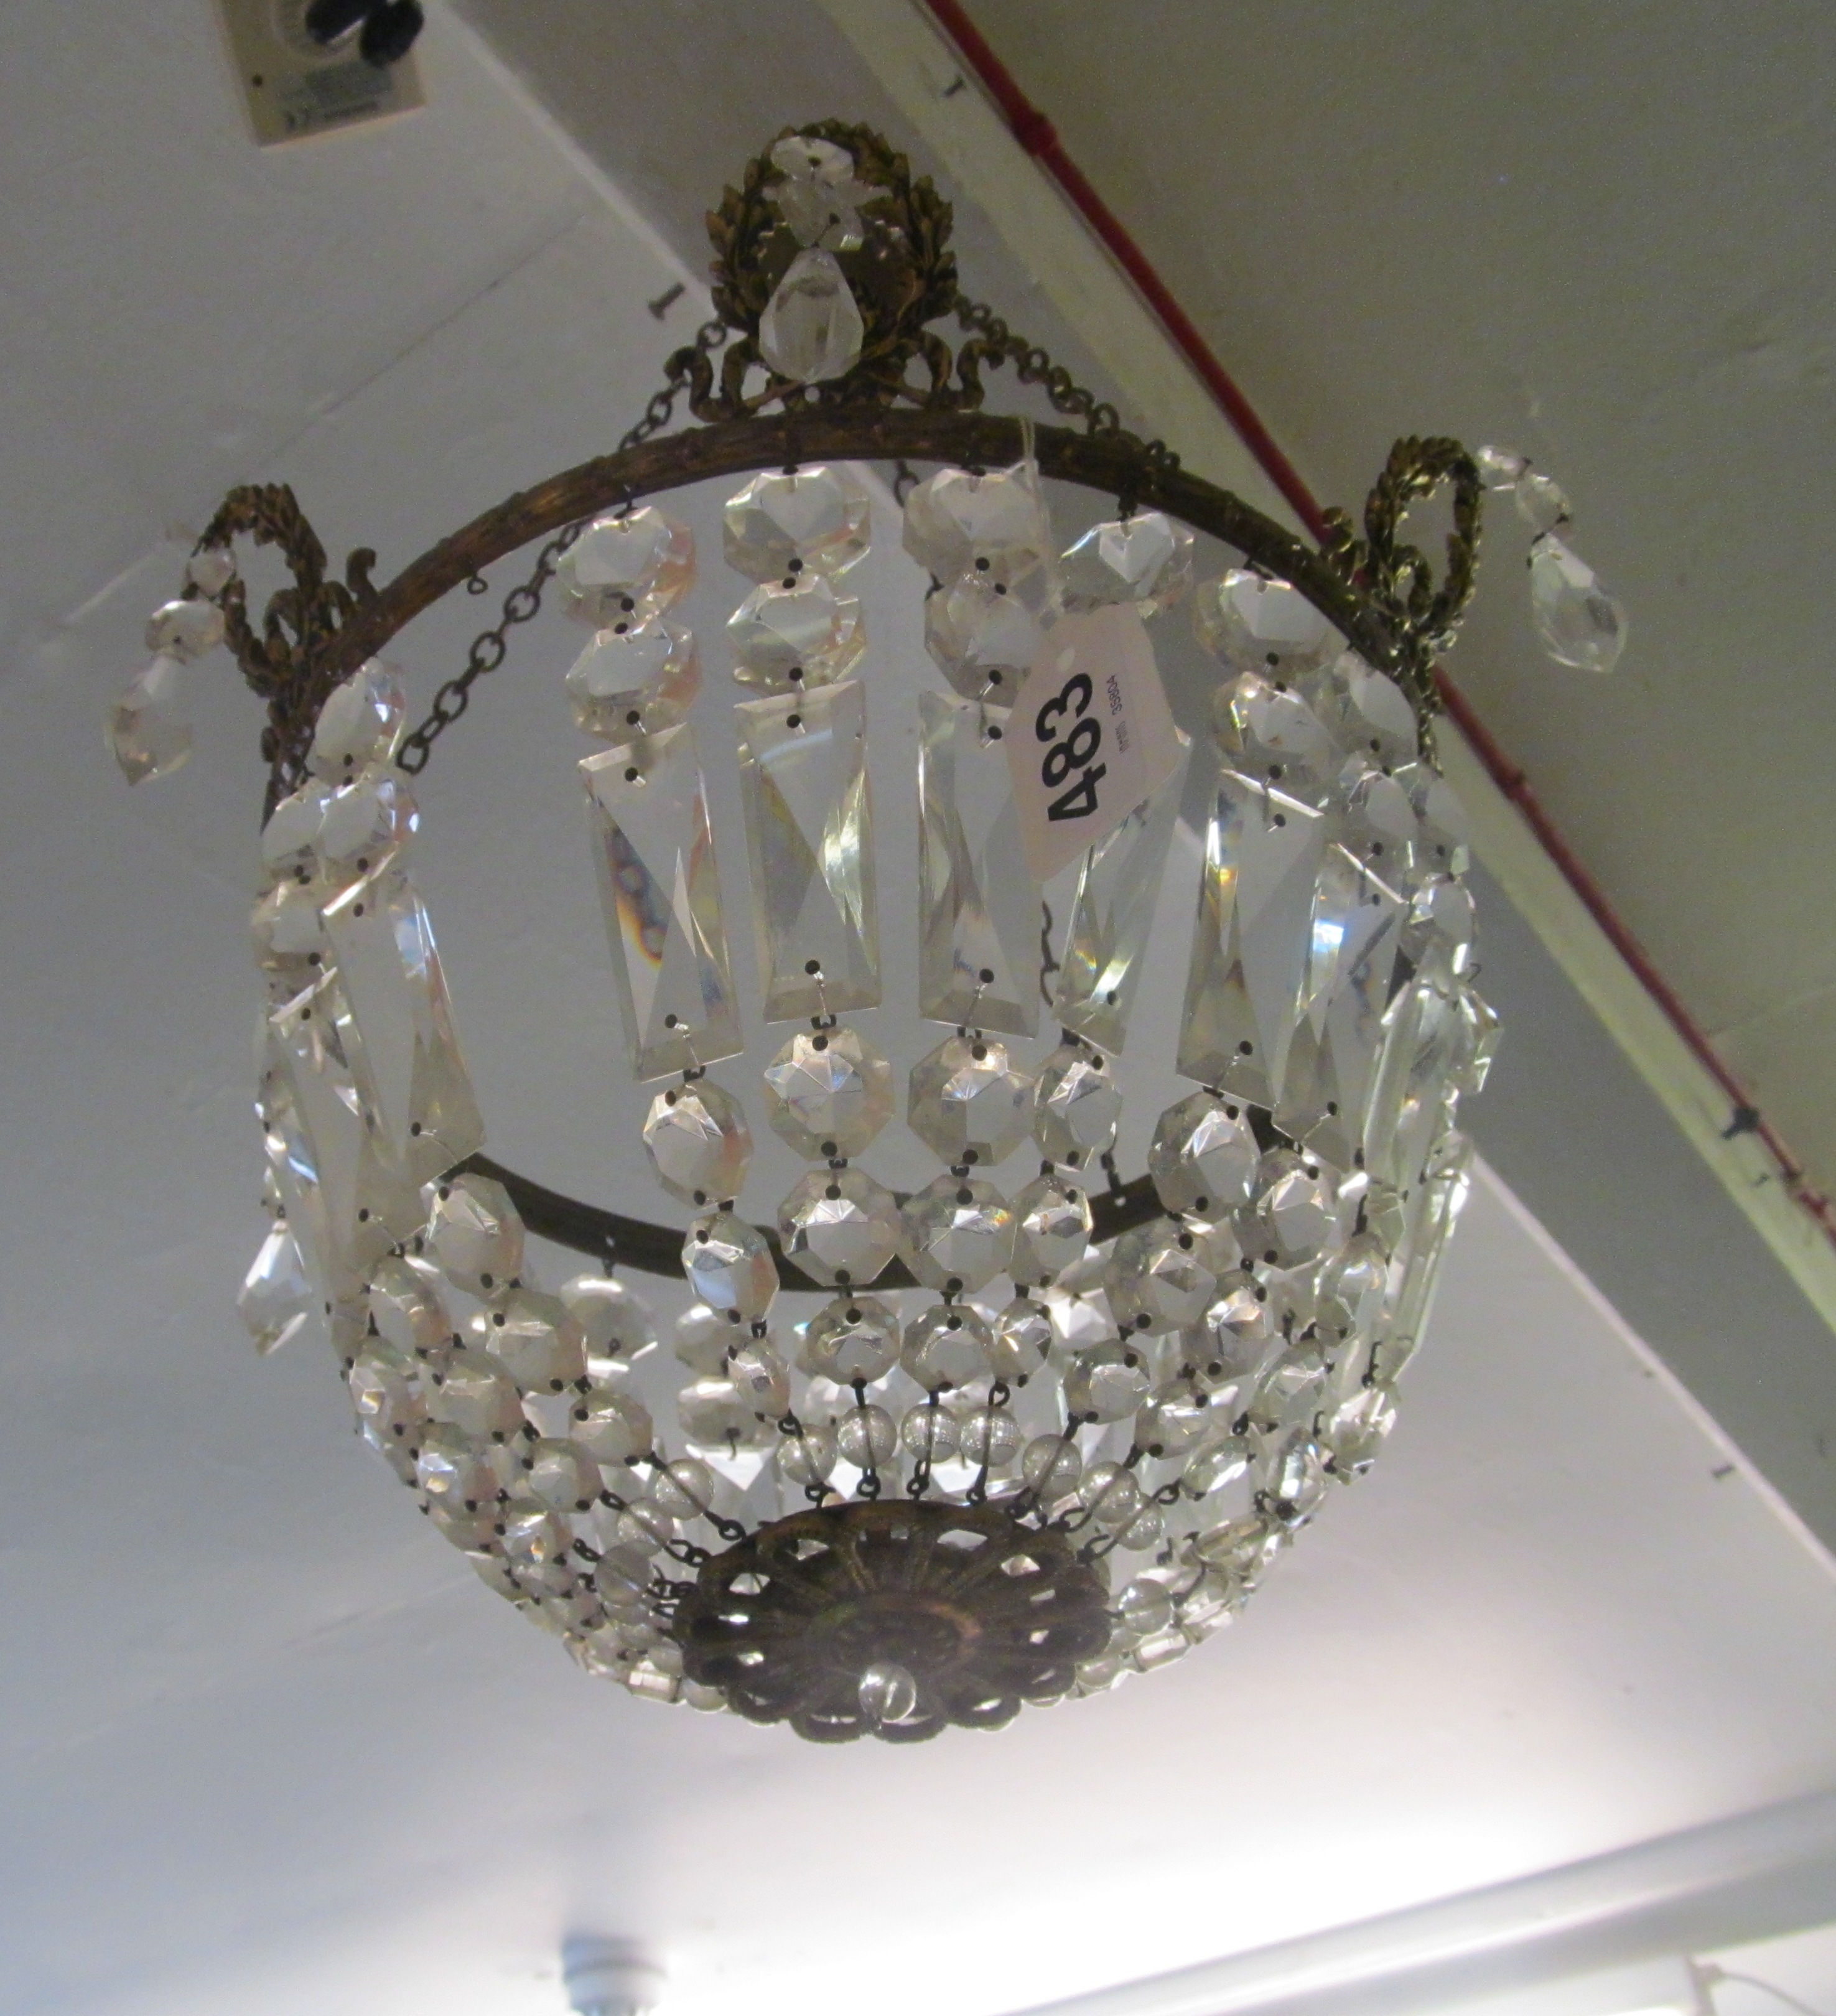 A glass bag chandelier with wreath motif to rim